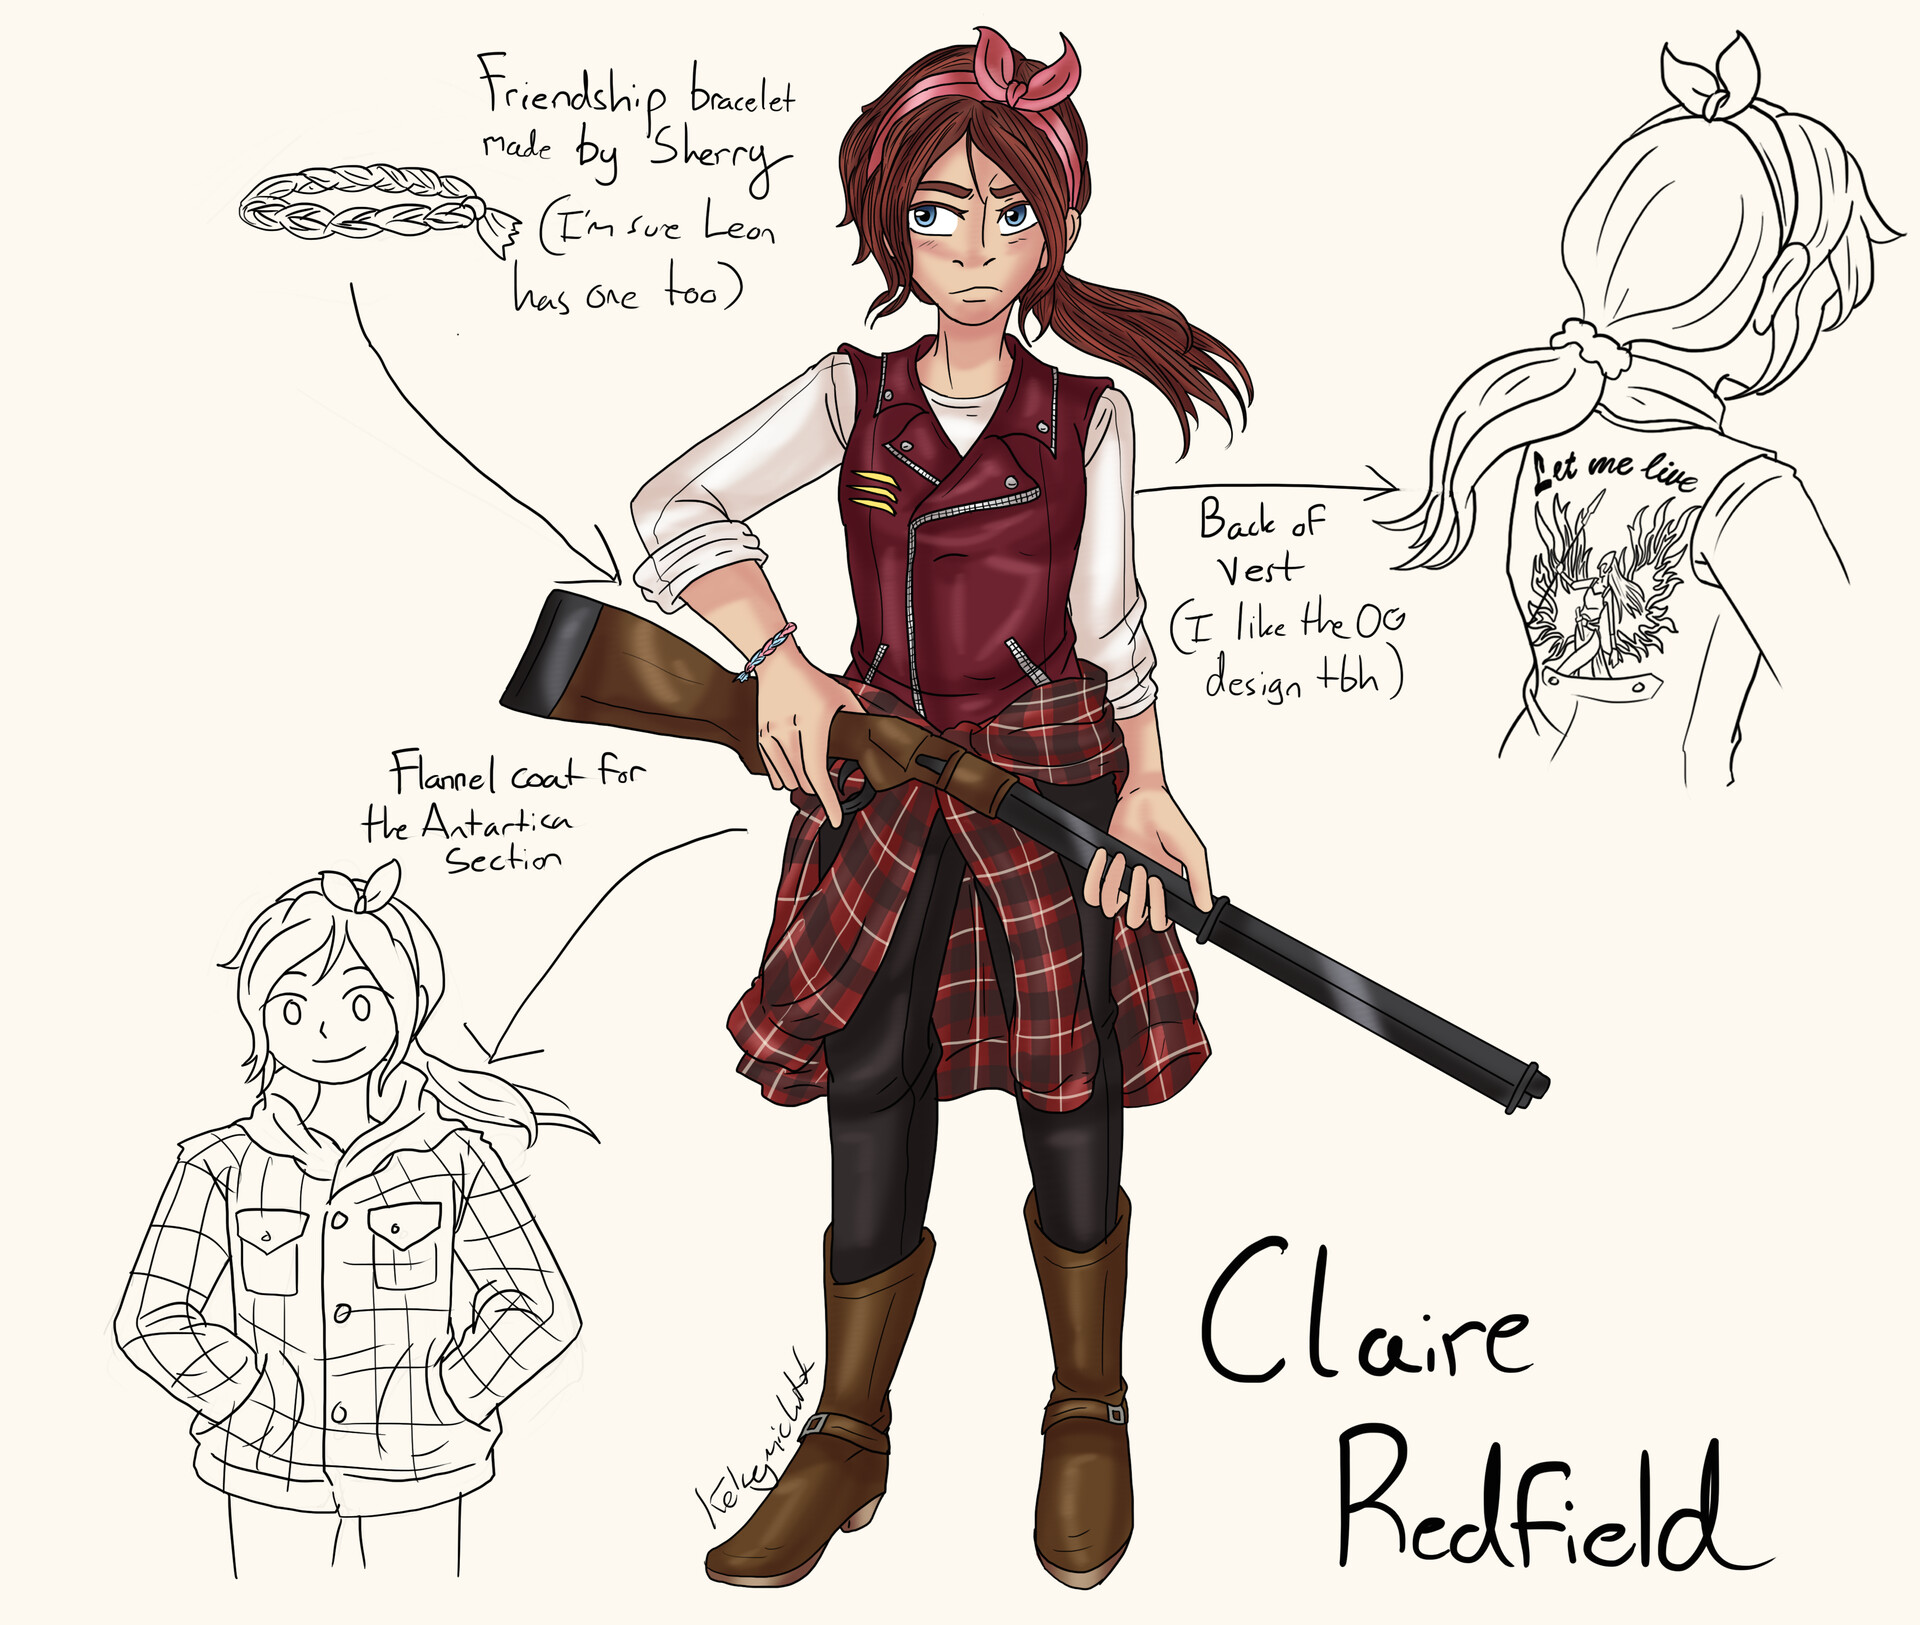 Claire Redfield - Characters & Art - Resident Evil: Code Veronica